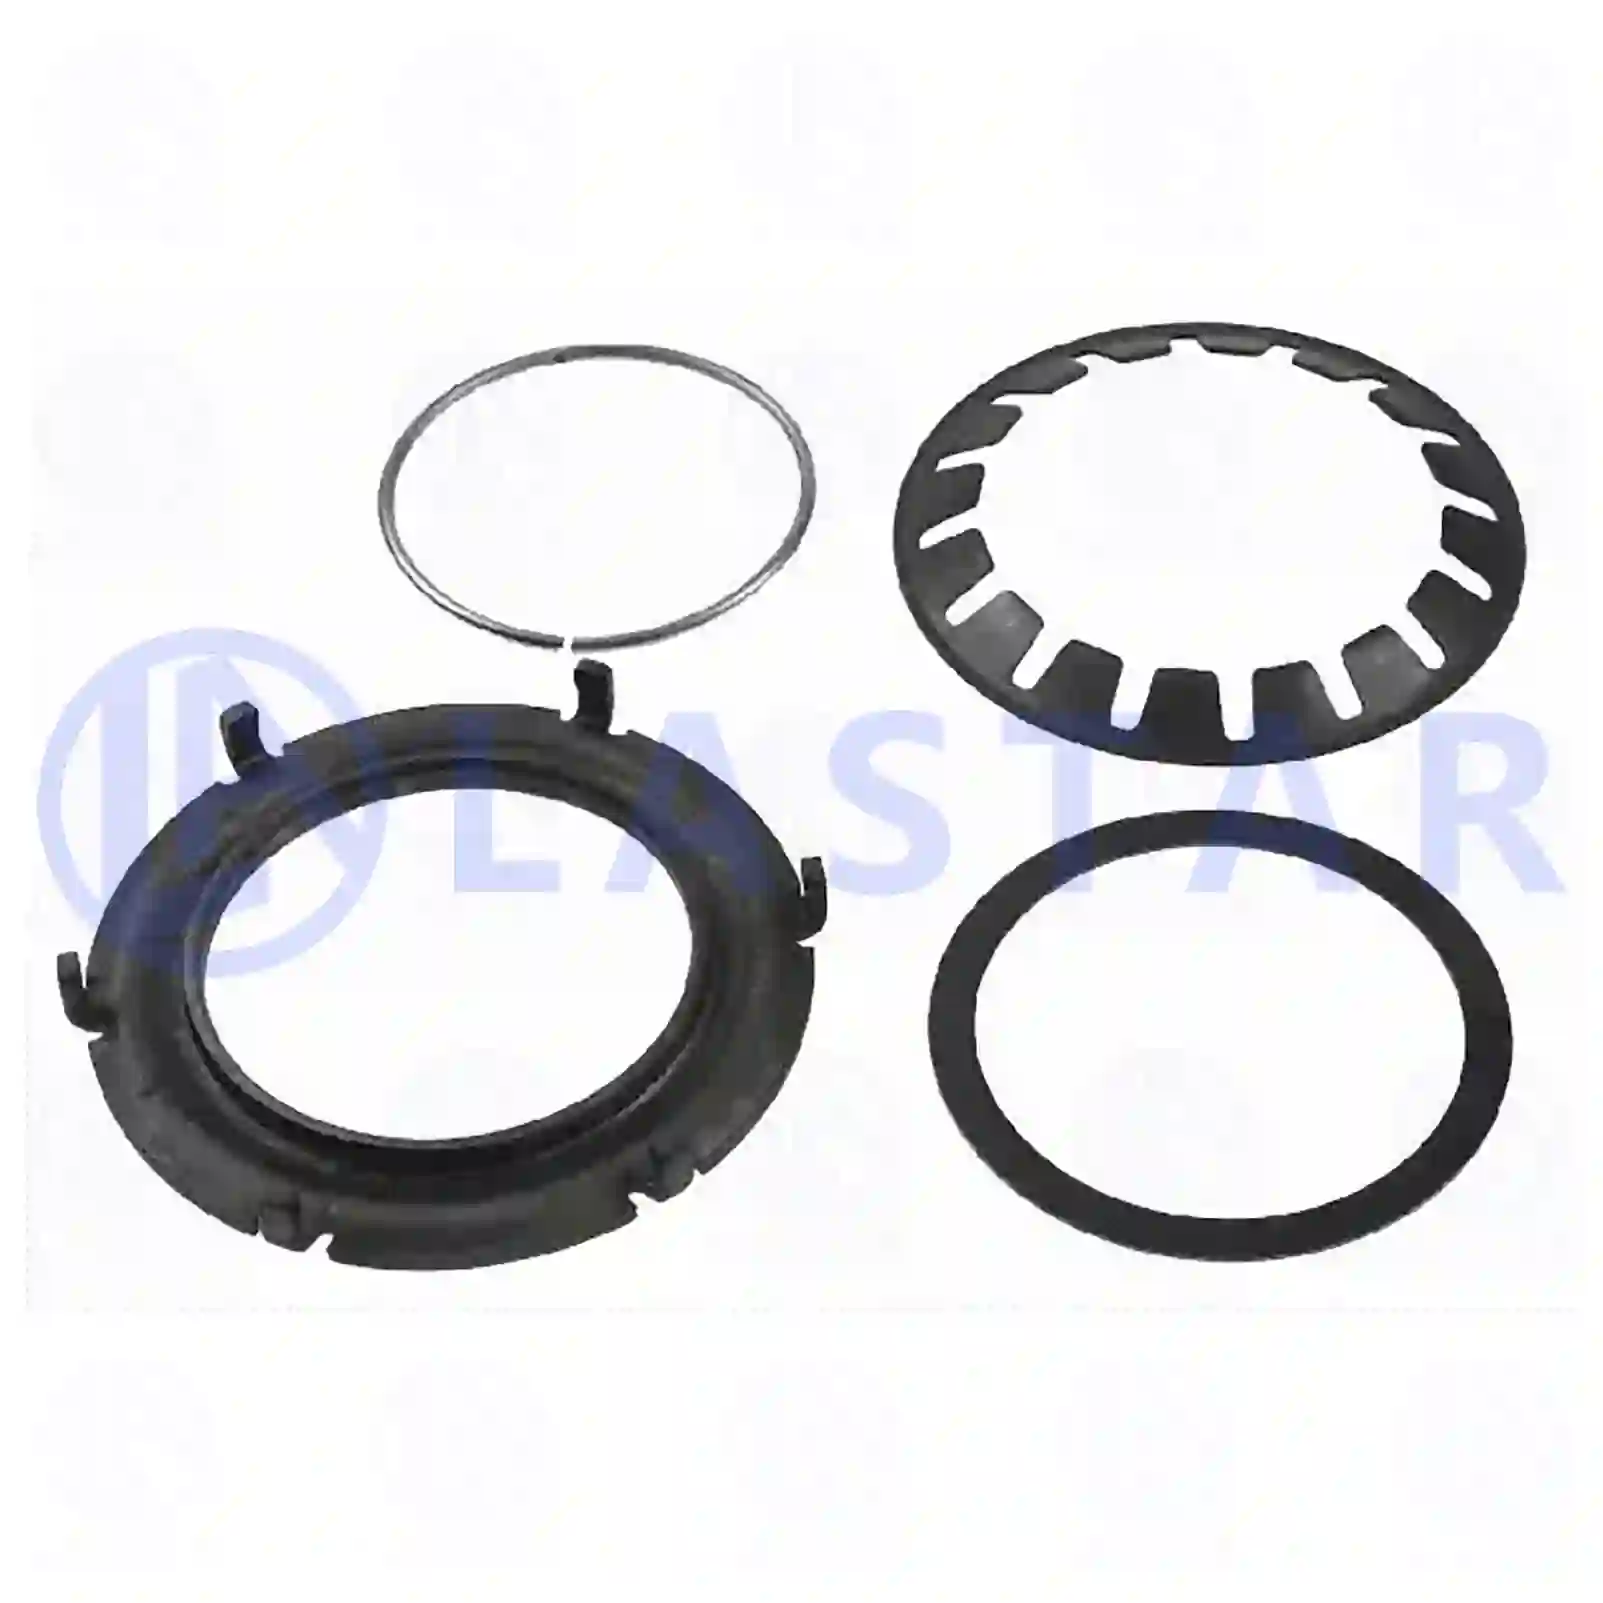 Mounting kit, coupling, 77722108, 5001825649, 1393187, 388054, 1673220, 20571945 ||  77722108 Lastar Spare Part | Truck Spare Parts, Auotomotive Spare Parts Mounting kit, coupling, 77722108, 5001825649, 1393187, 388054, 1673220, 20571945 ||  77722108 Lastar Spare Part | Truck Spare Parts, Auotomotive Spare Parts